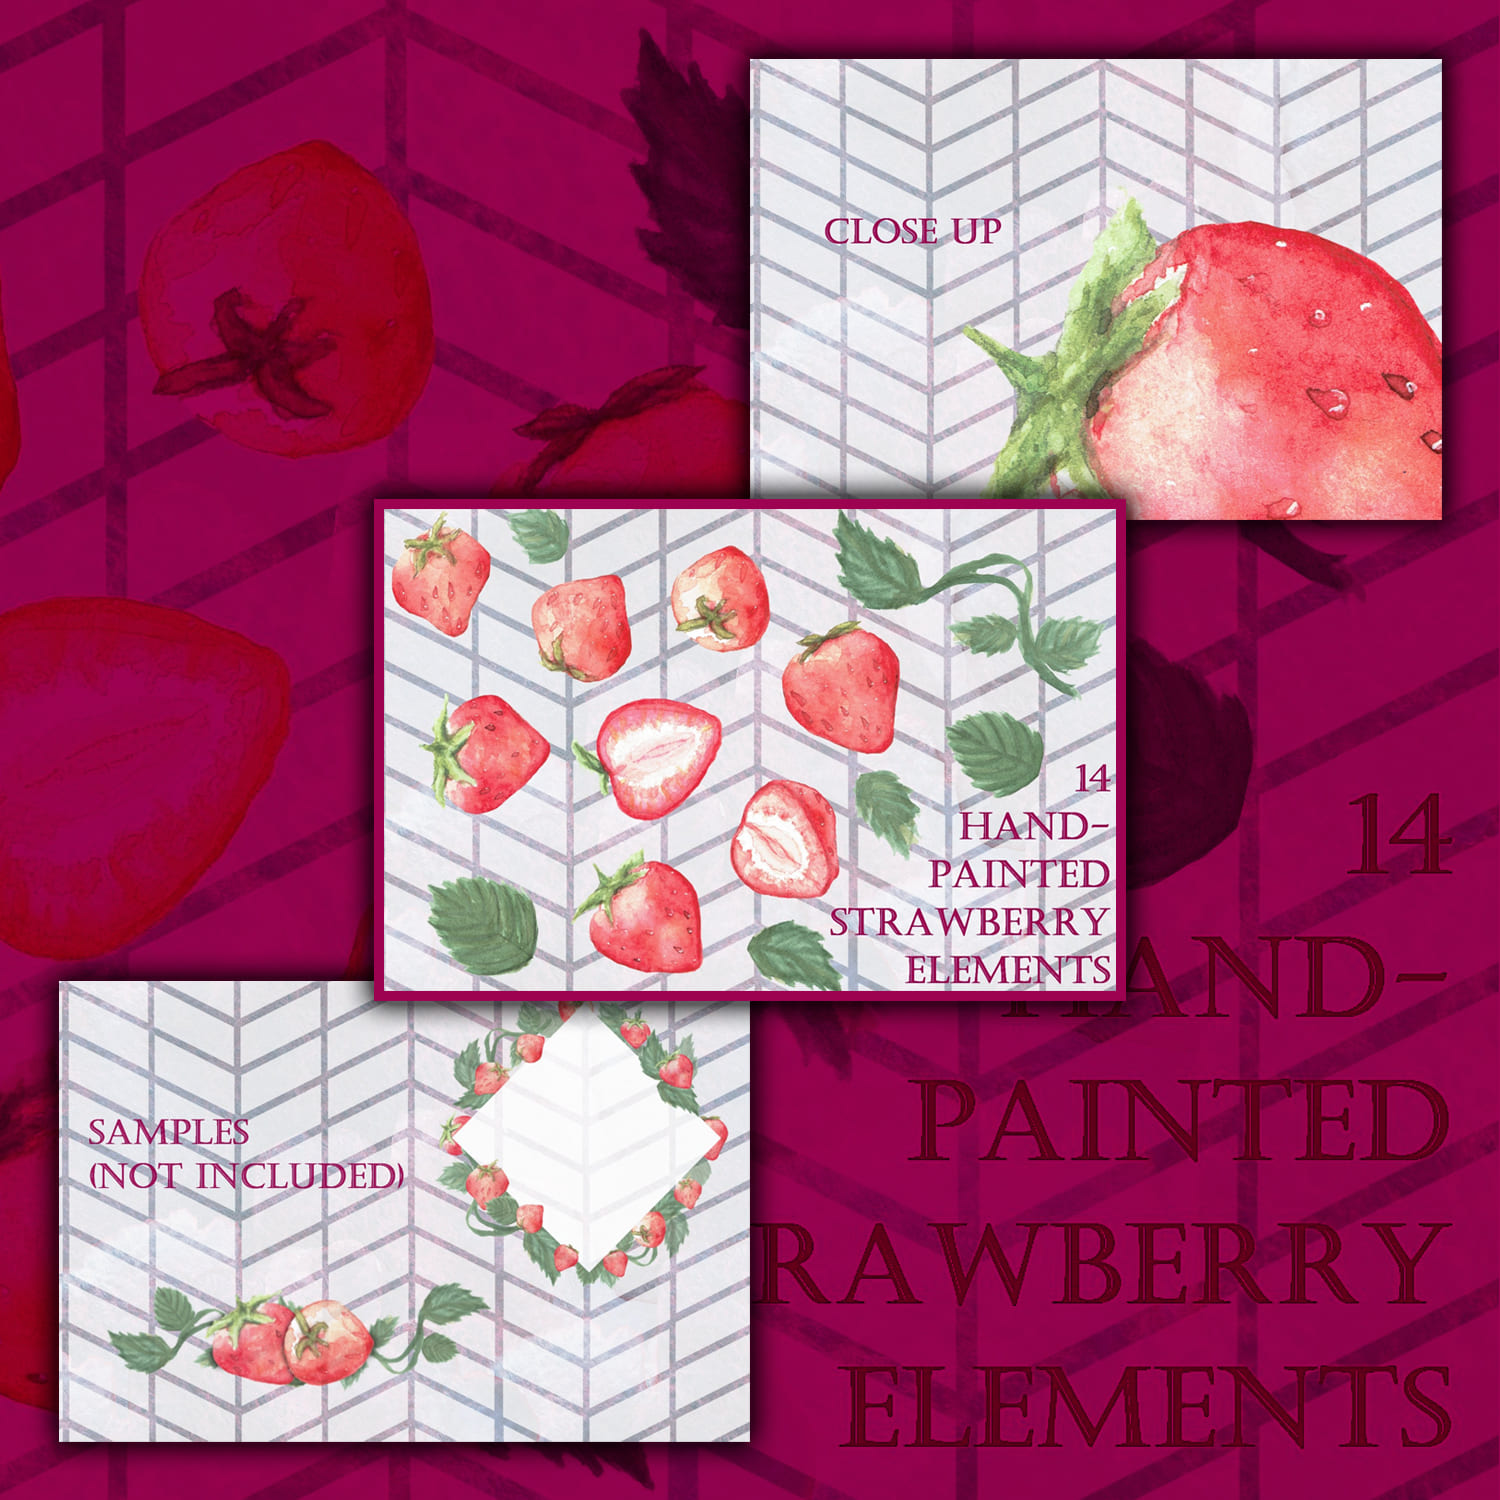 14 Handpainted Strawberry Elements by Tubigan Art.